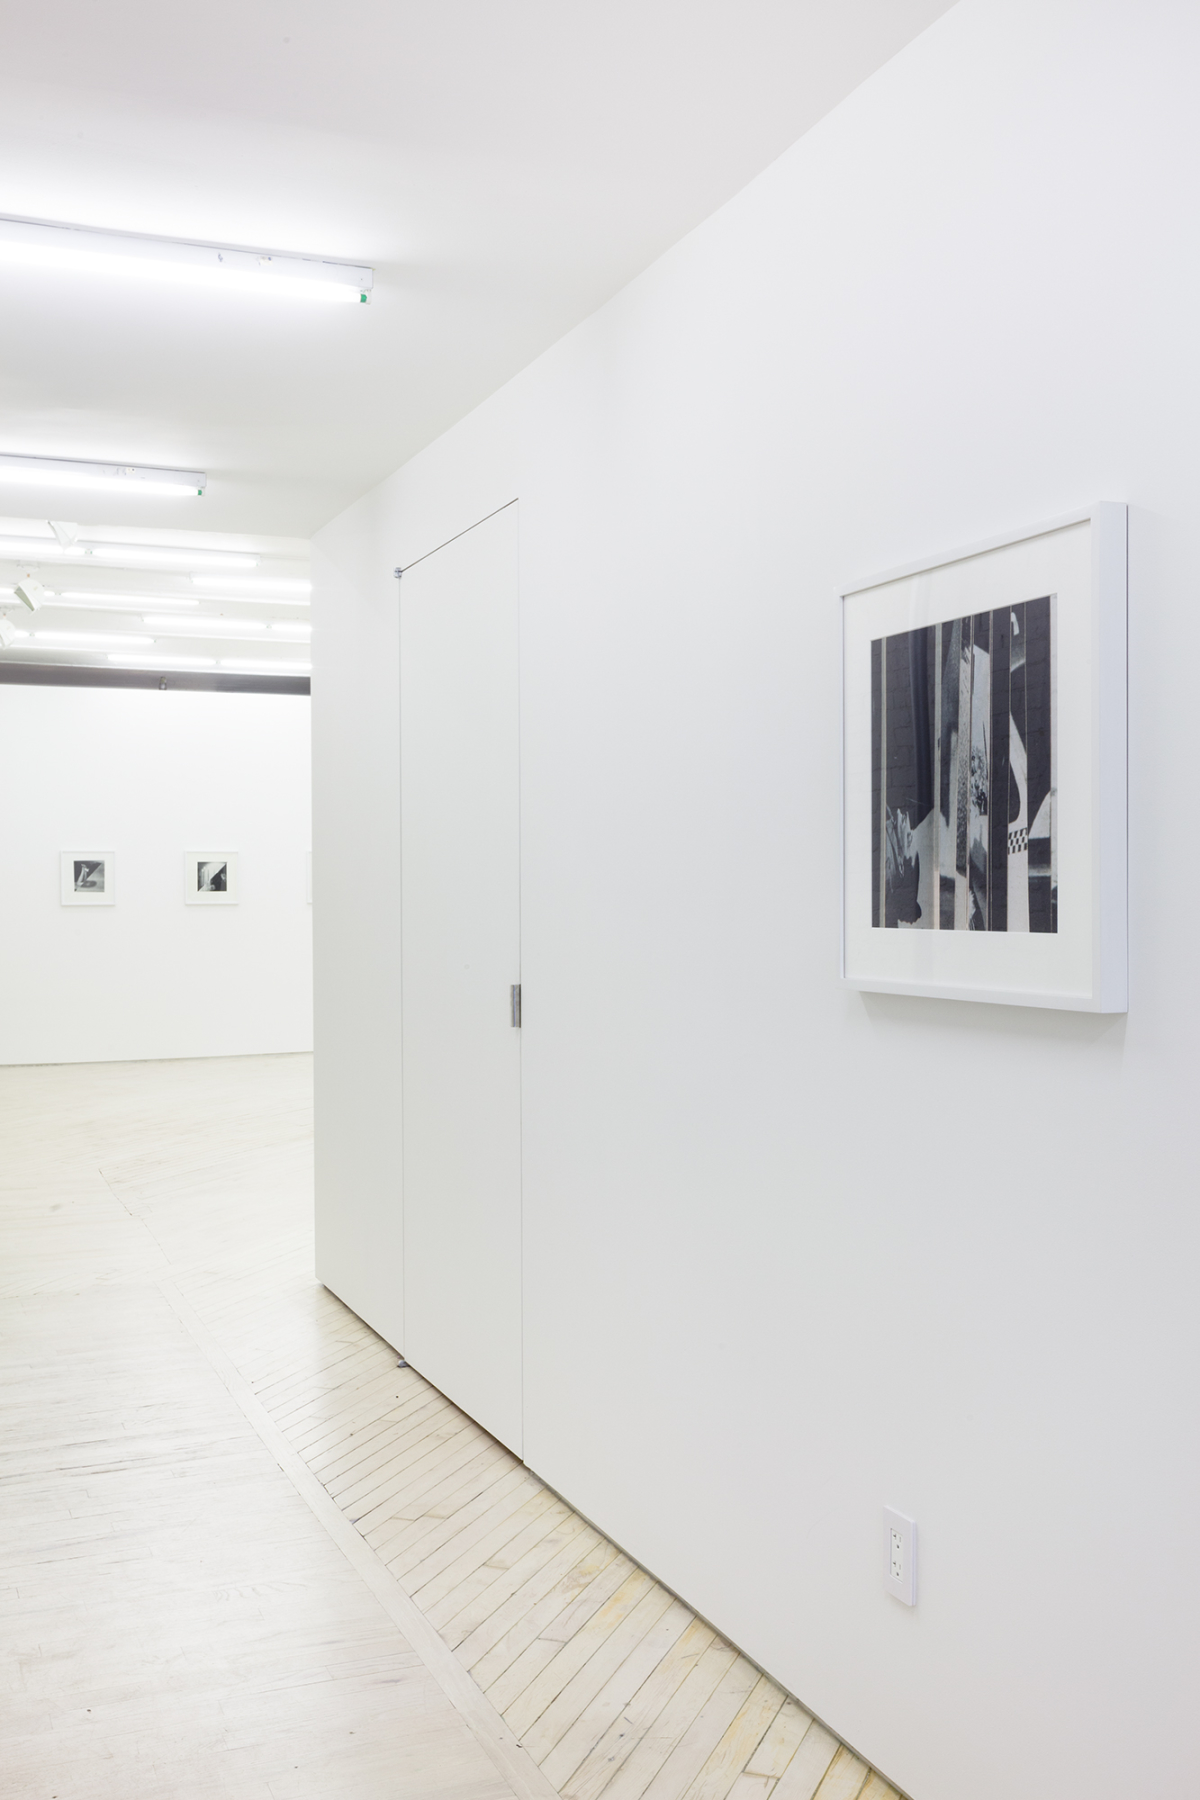 Image of Bureau's white painted hallway with a black and white framed photograph in the foreground and two smaller photographs at a distance inside the main space.